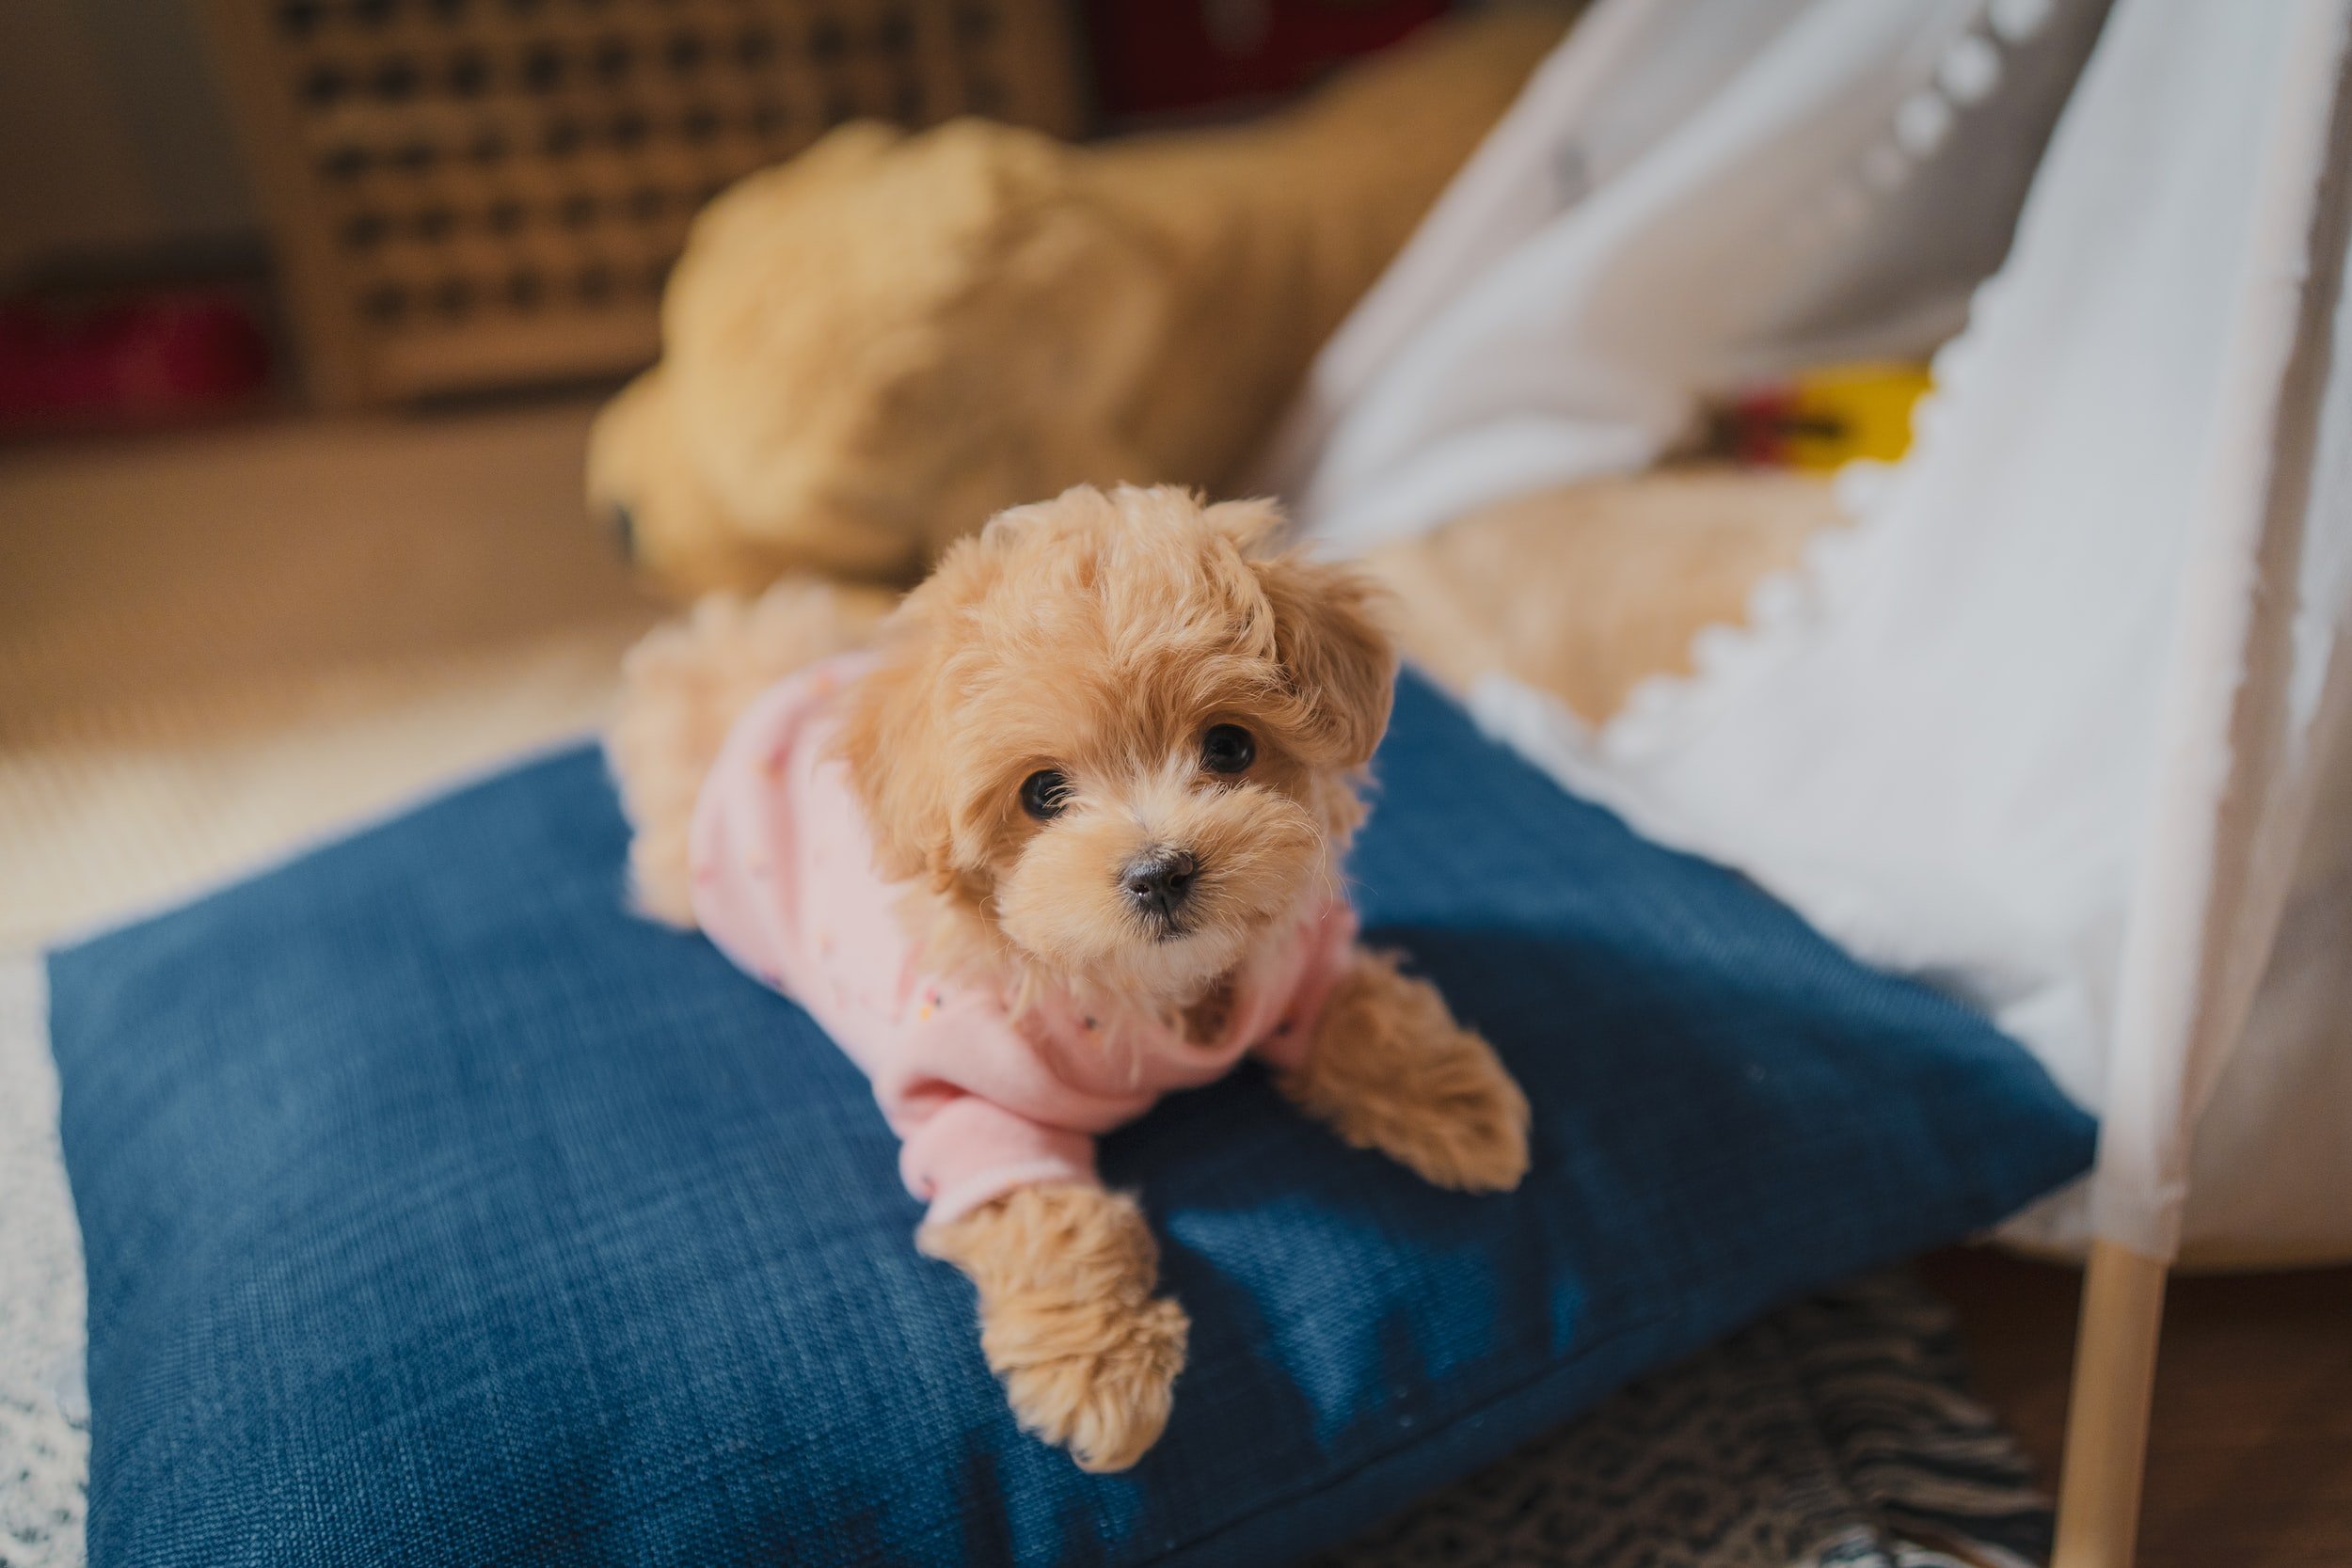 What to Put in a New Puppy Gift Basket